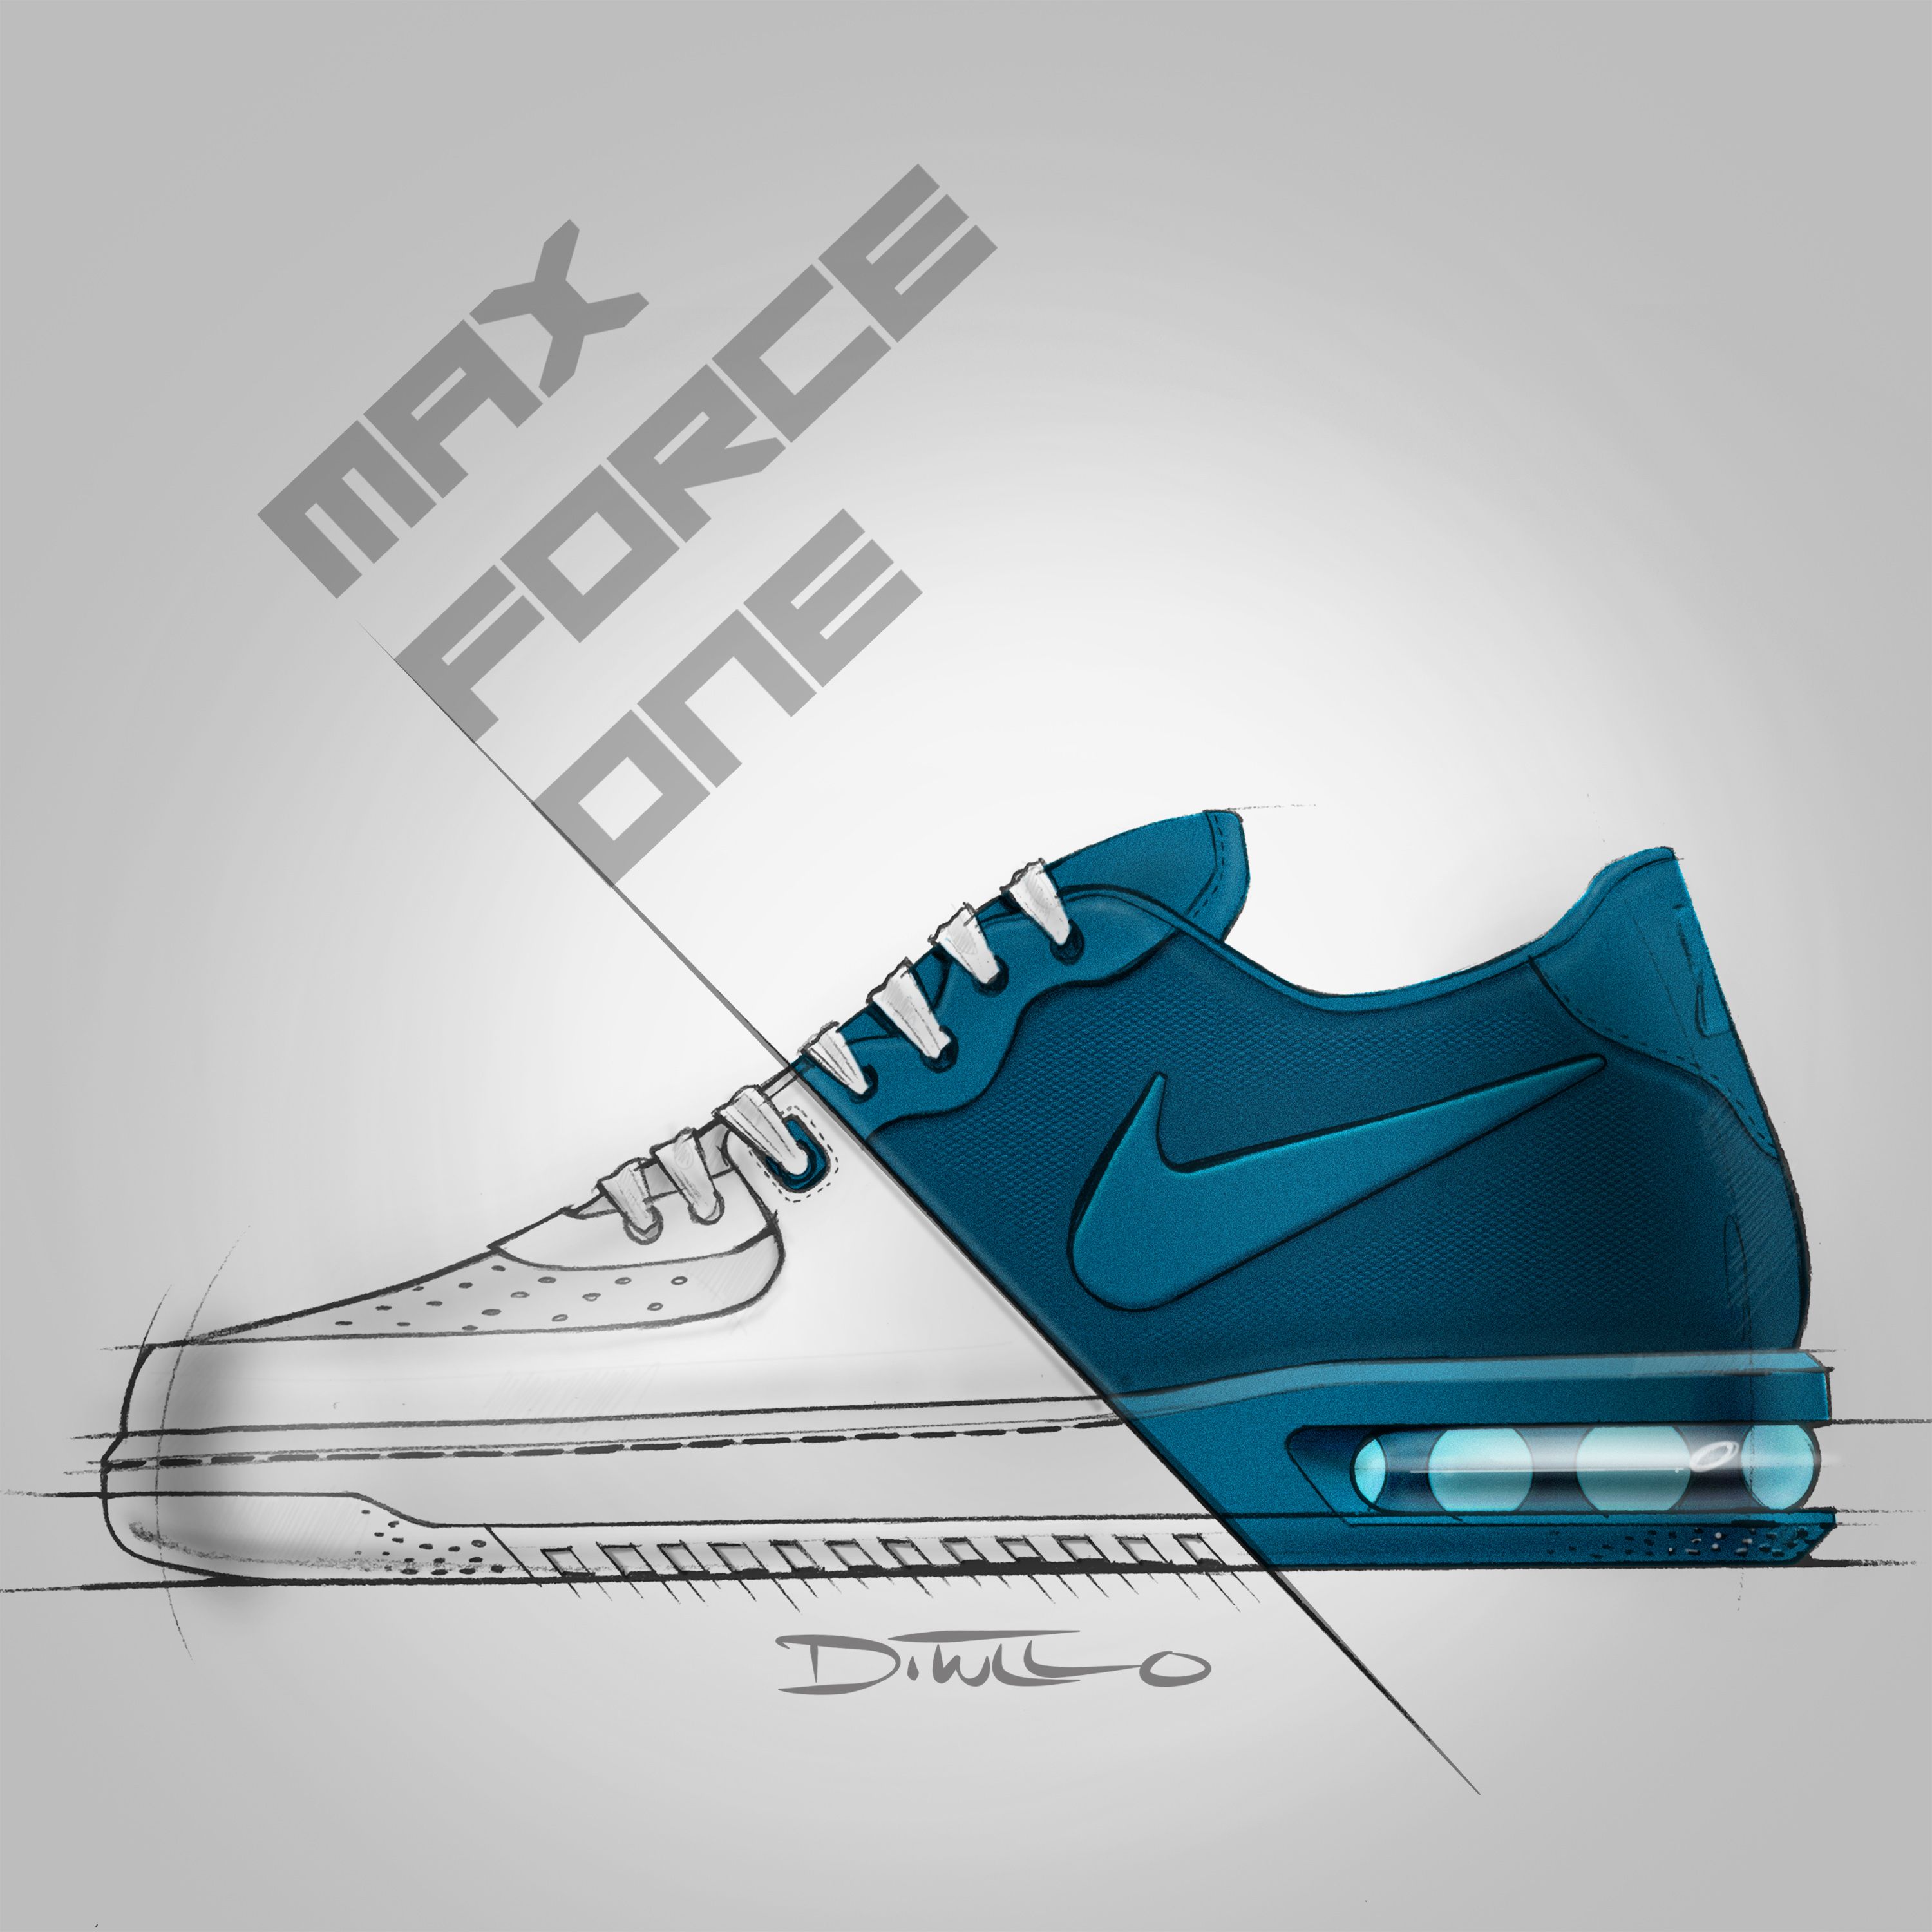 Nike Air Force 1 Sketch at Explore collection of